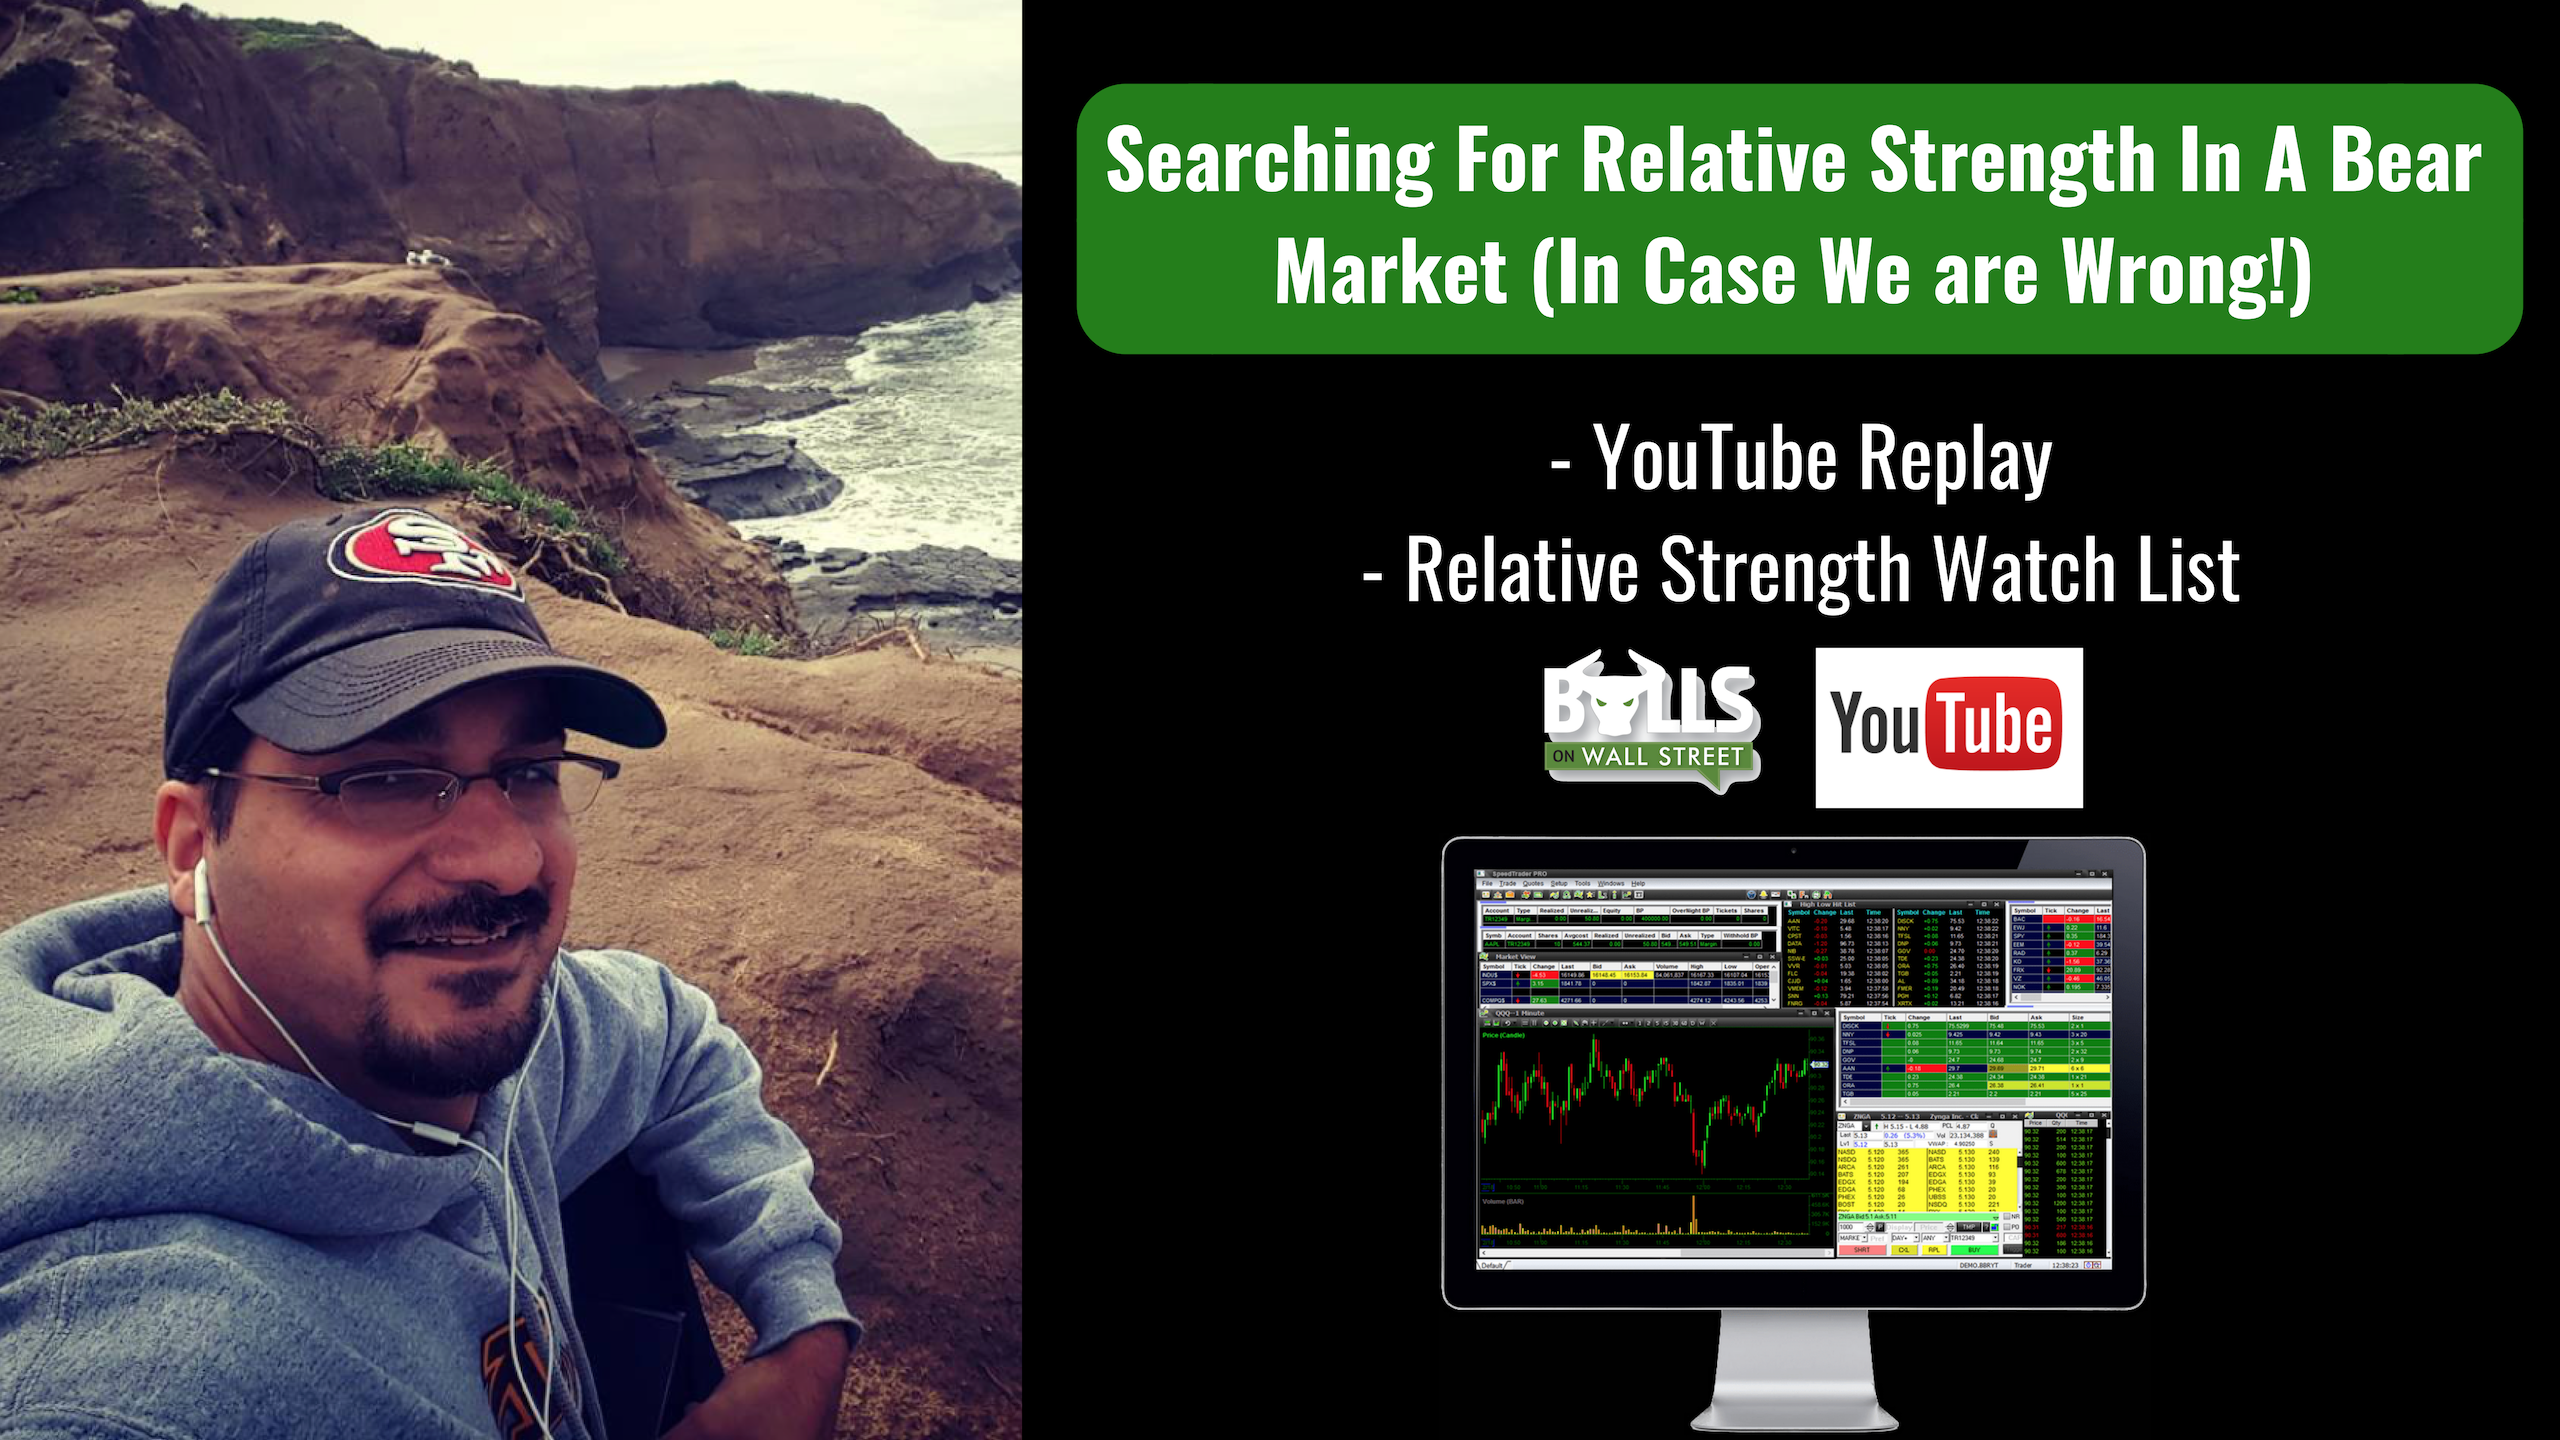 Searching For Relative Strength In A Bear Market (In Case We are Wrong!)